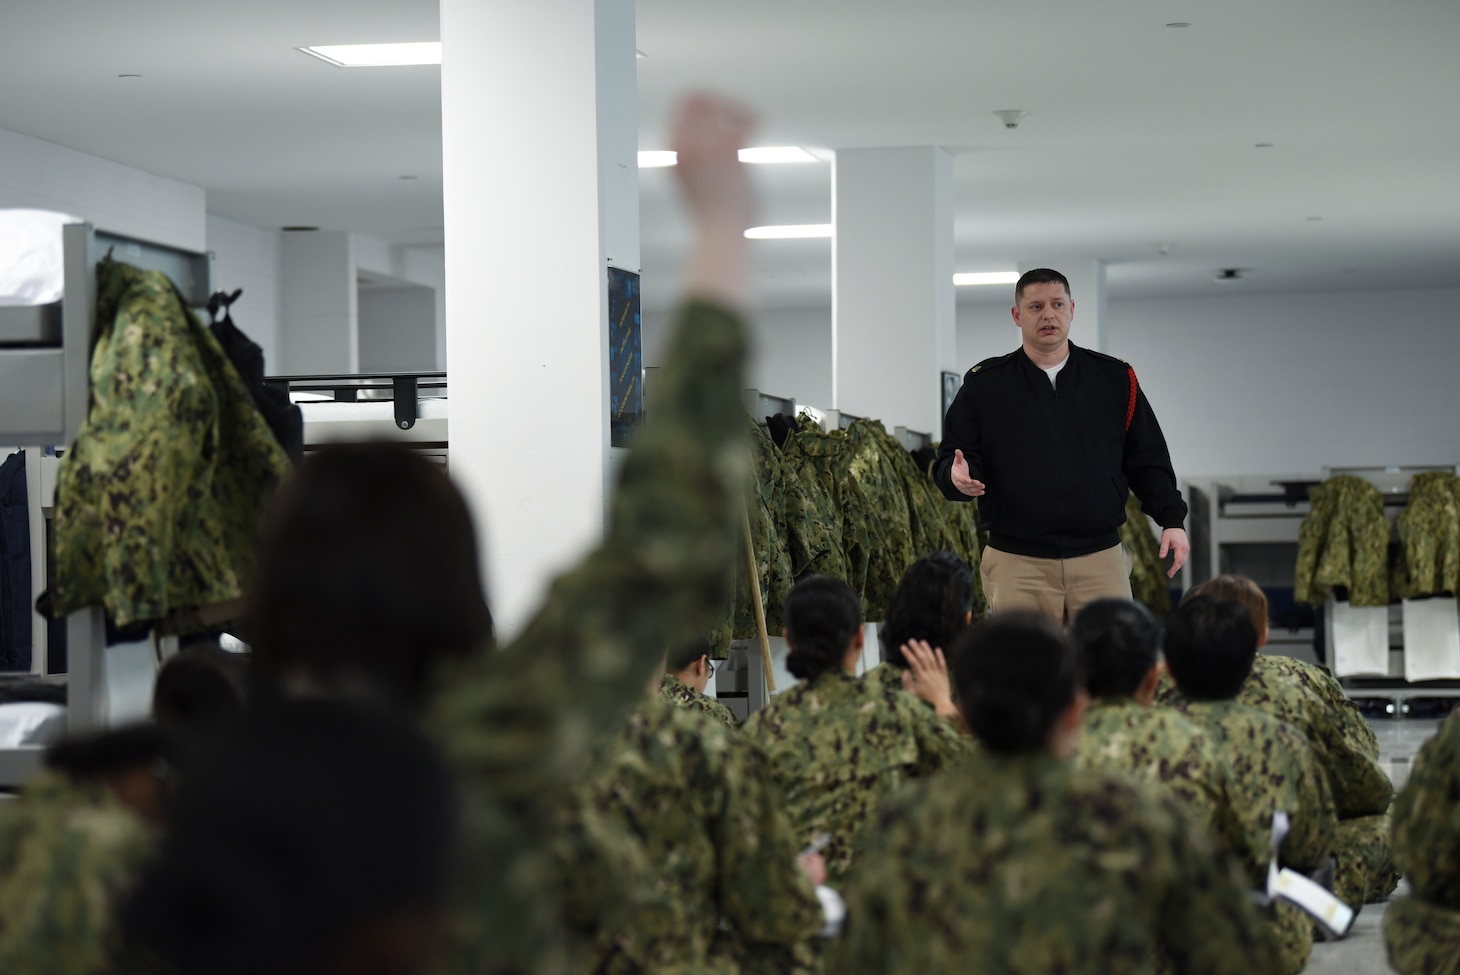 190207-N-BM202-2085 GREAT LAKES, Ill. (Feb. 7, 2019) Recruits ask their recruit division commander questions during general military training at Recruit Training Command. More than 30,000 recruits graduate annually from the Navy's only boot camp. (U.S. Navy photo by Mass Communication Specialist 2nd Class Camilo Fernan)